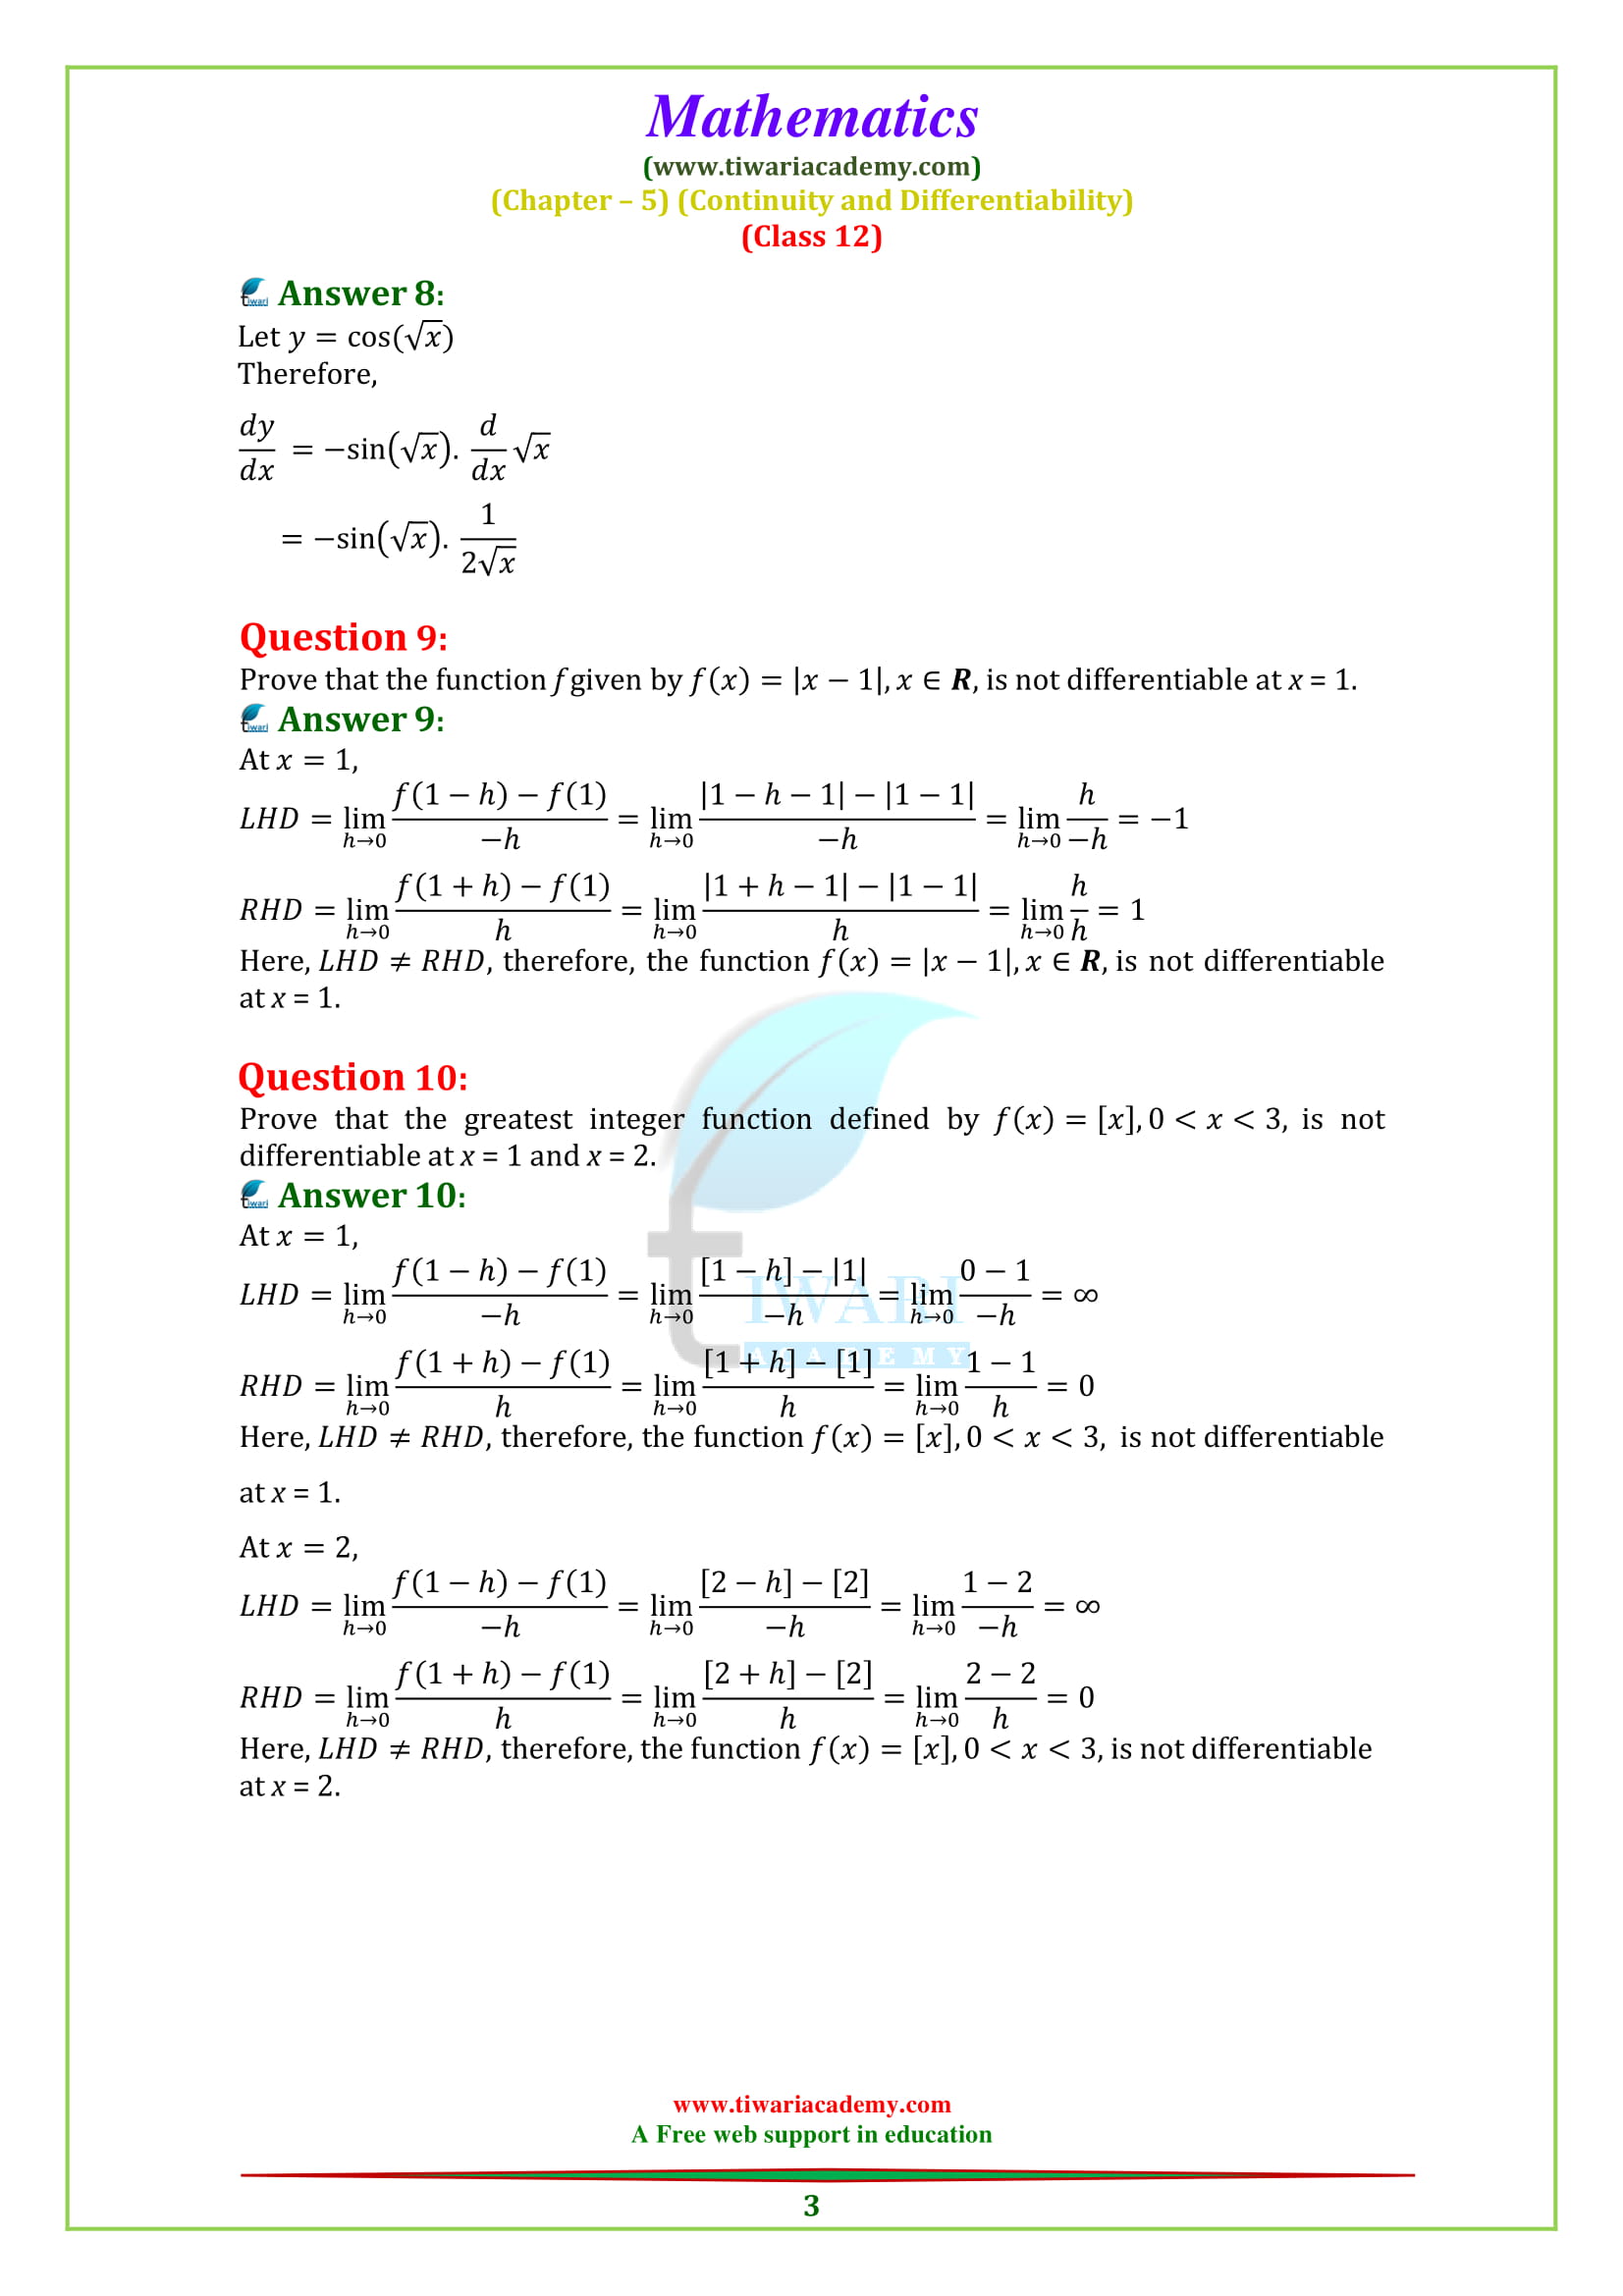 12 Maths Chapter 5 Exercise 5.2 Continuity and Differentiability updated for 2018-19